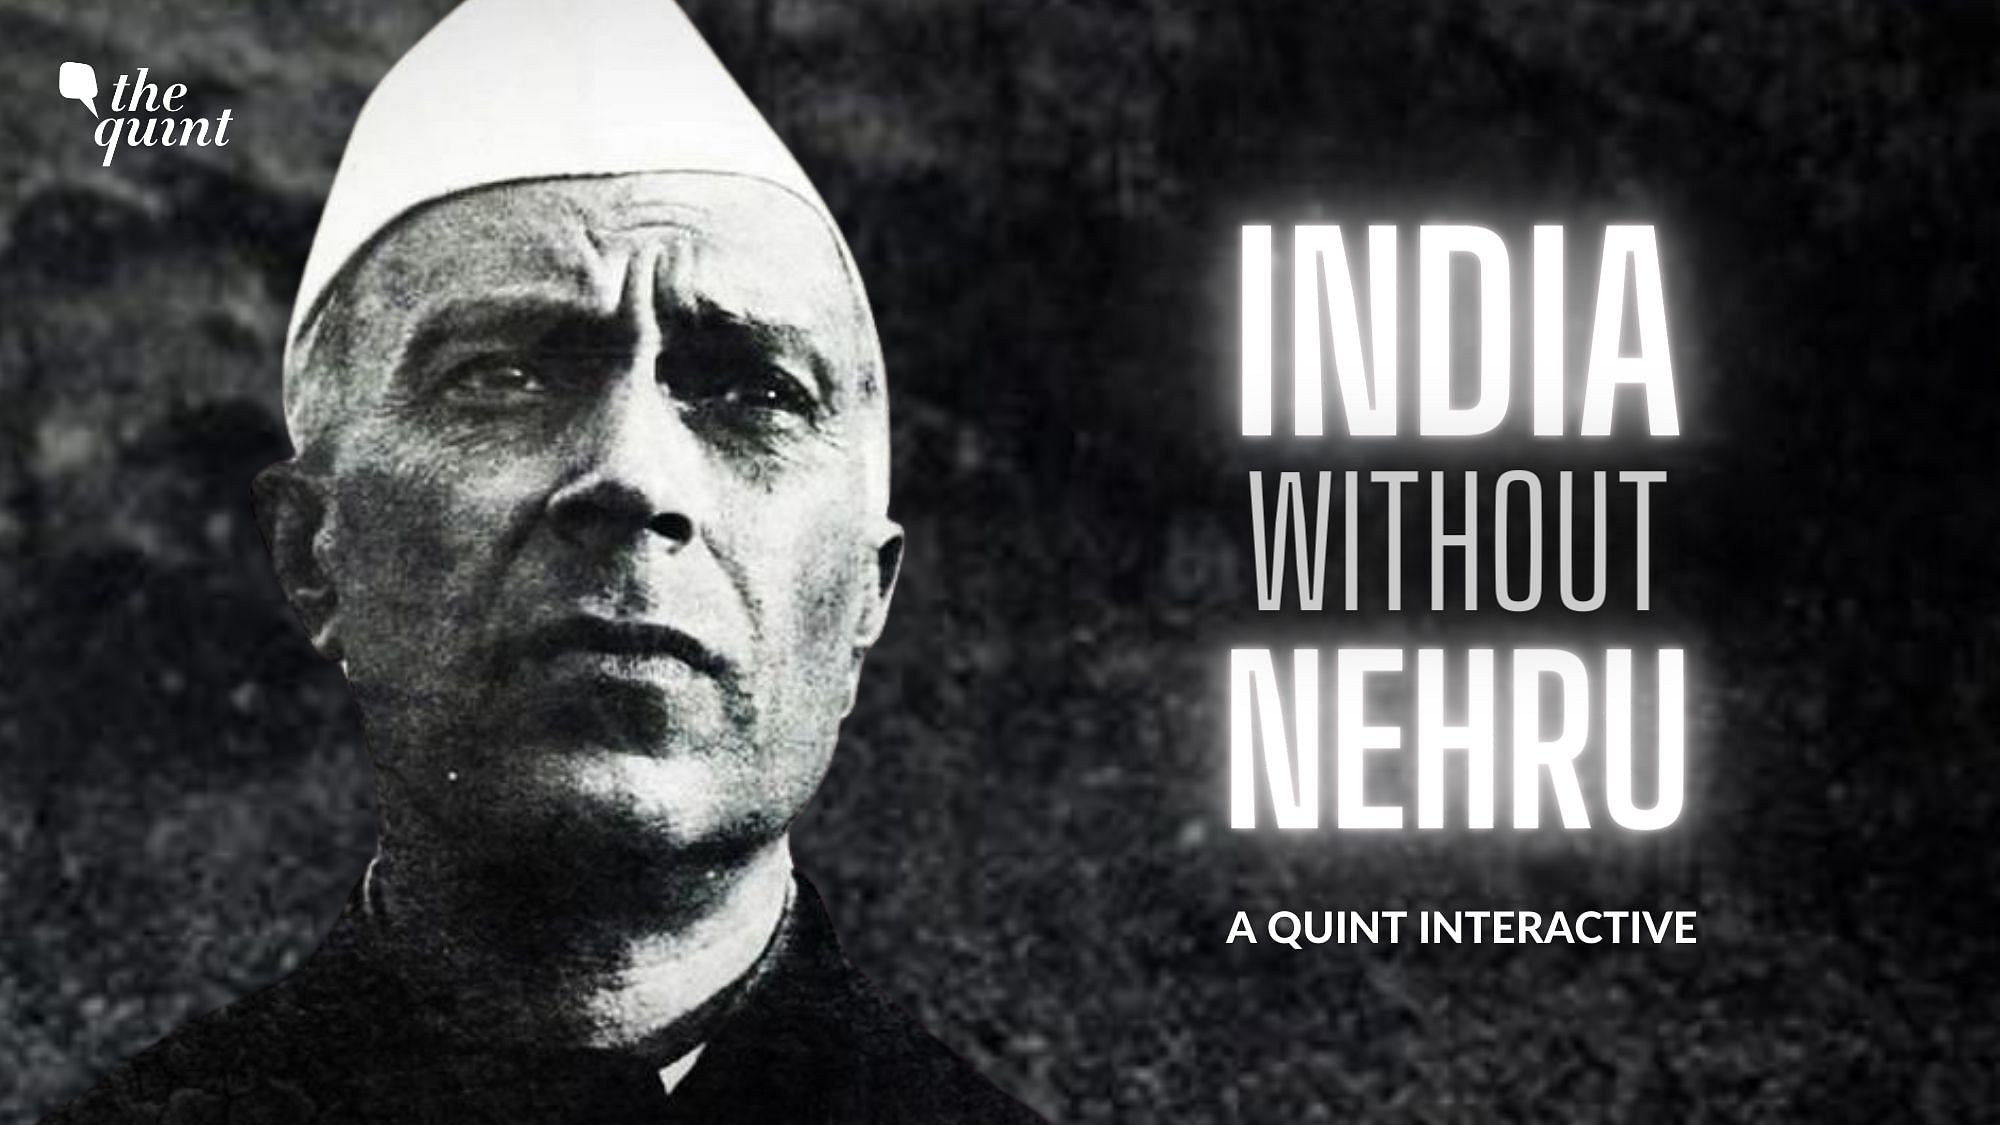 <div class="paragraphs"><p>On Jawaharlal Nehru's 132nd birth anniversary, we ask if his policies are relevant in today's India.</p></div>